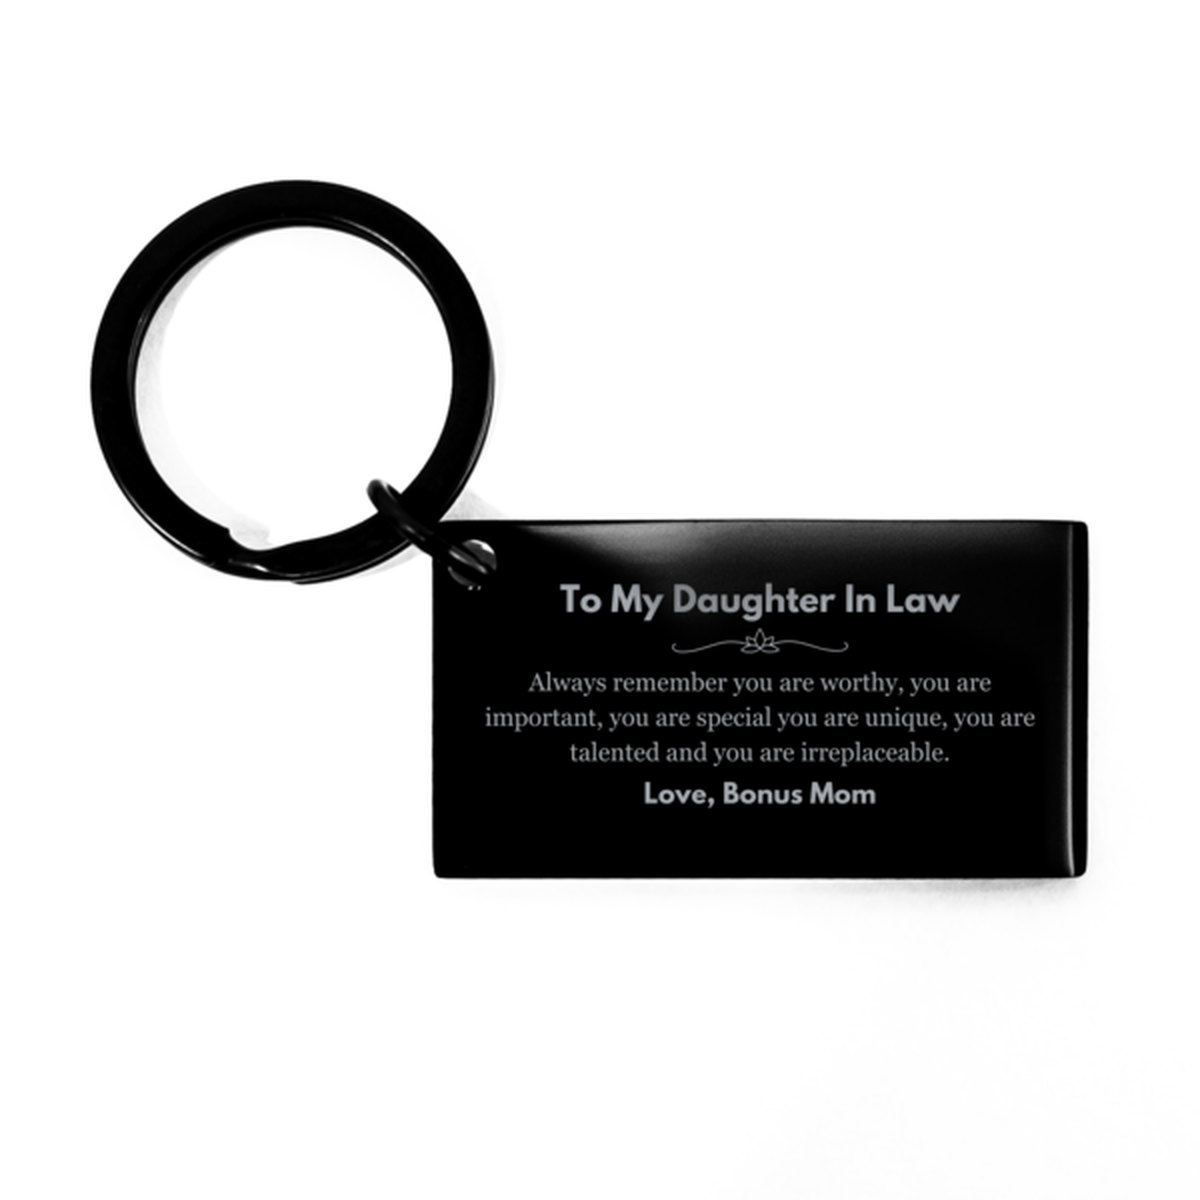 Daughter In Law Birthday Gifts from Bonus Mom, Inspirational Keychain for Daughter In Law Christmas Graduation Gifts for Daughter In Law Always remember you are worthy, you are important. Love, Bonus Mom